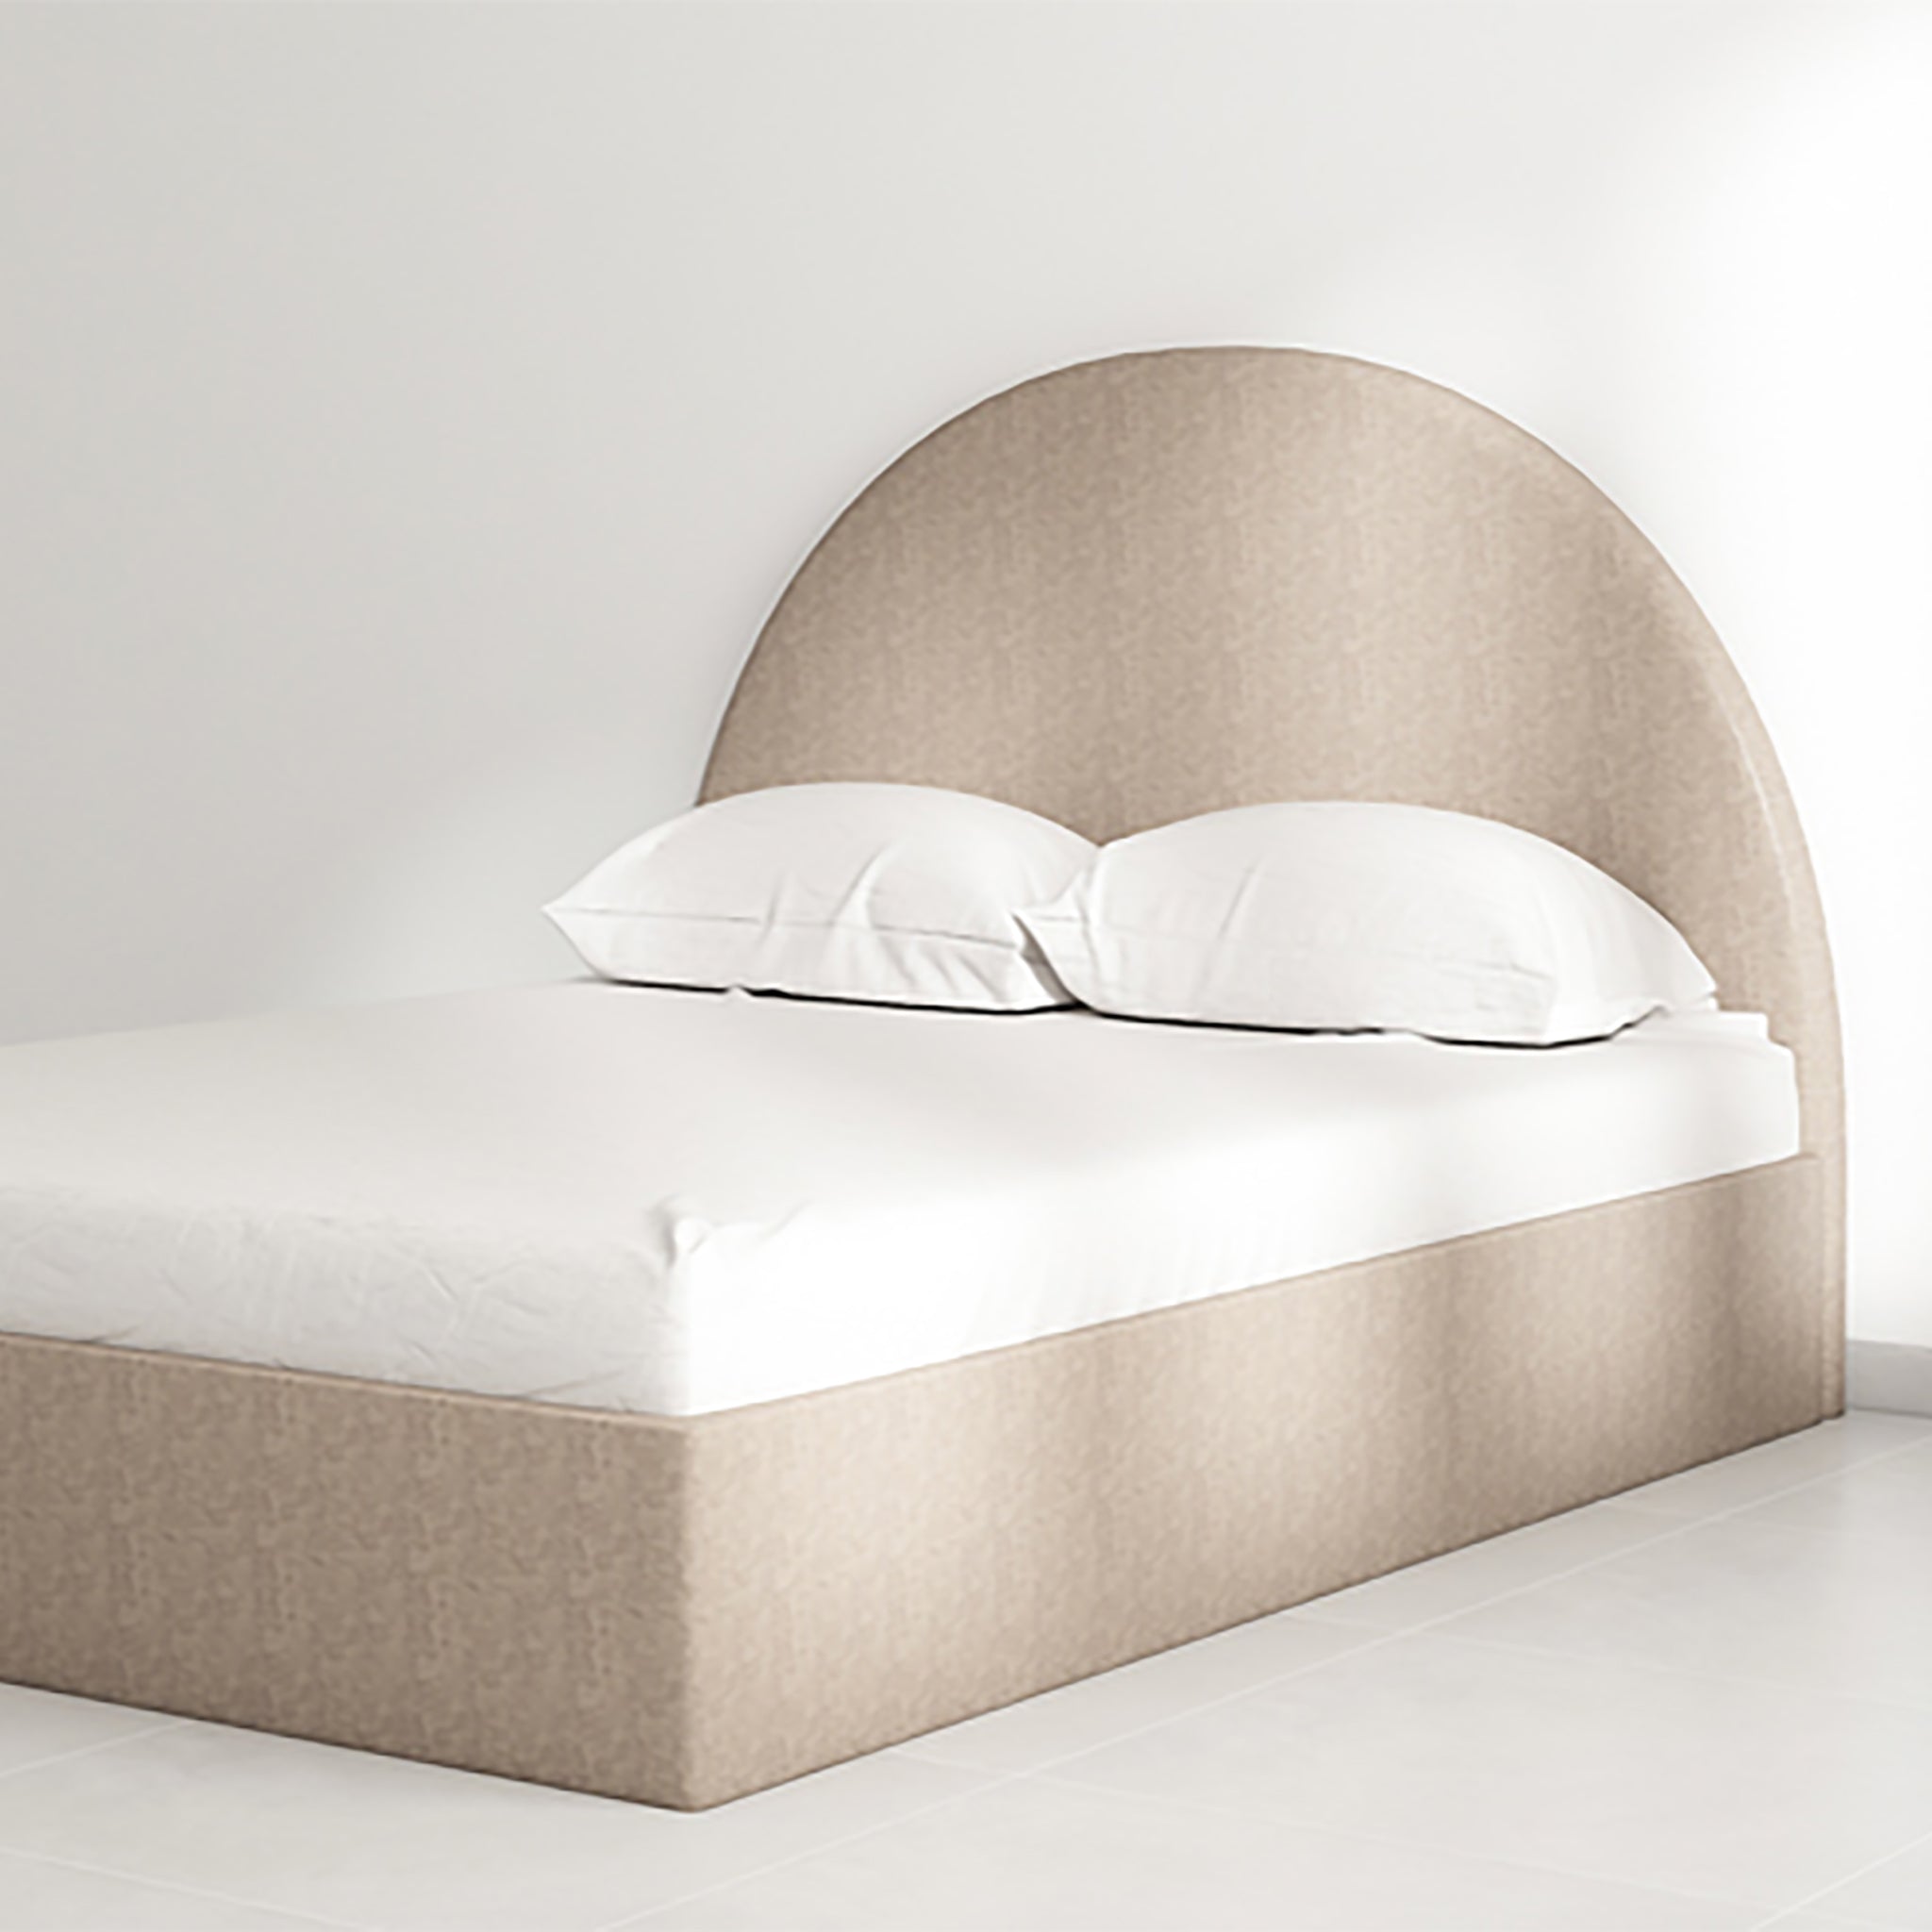 The Archie Bed featuring a luxurious curved headboard in warm beige textured upholstery. Modern and compact design, ideal for tight spaces, master bedrooms, and guest rooms. Stylish and comfortable furniture for contemporary homes.